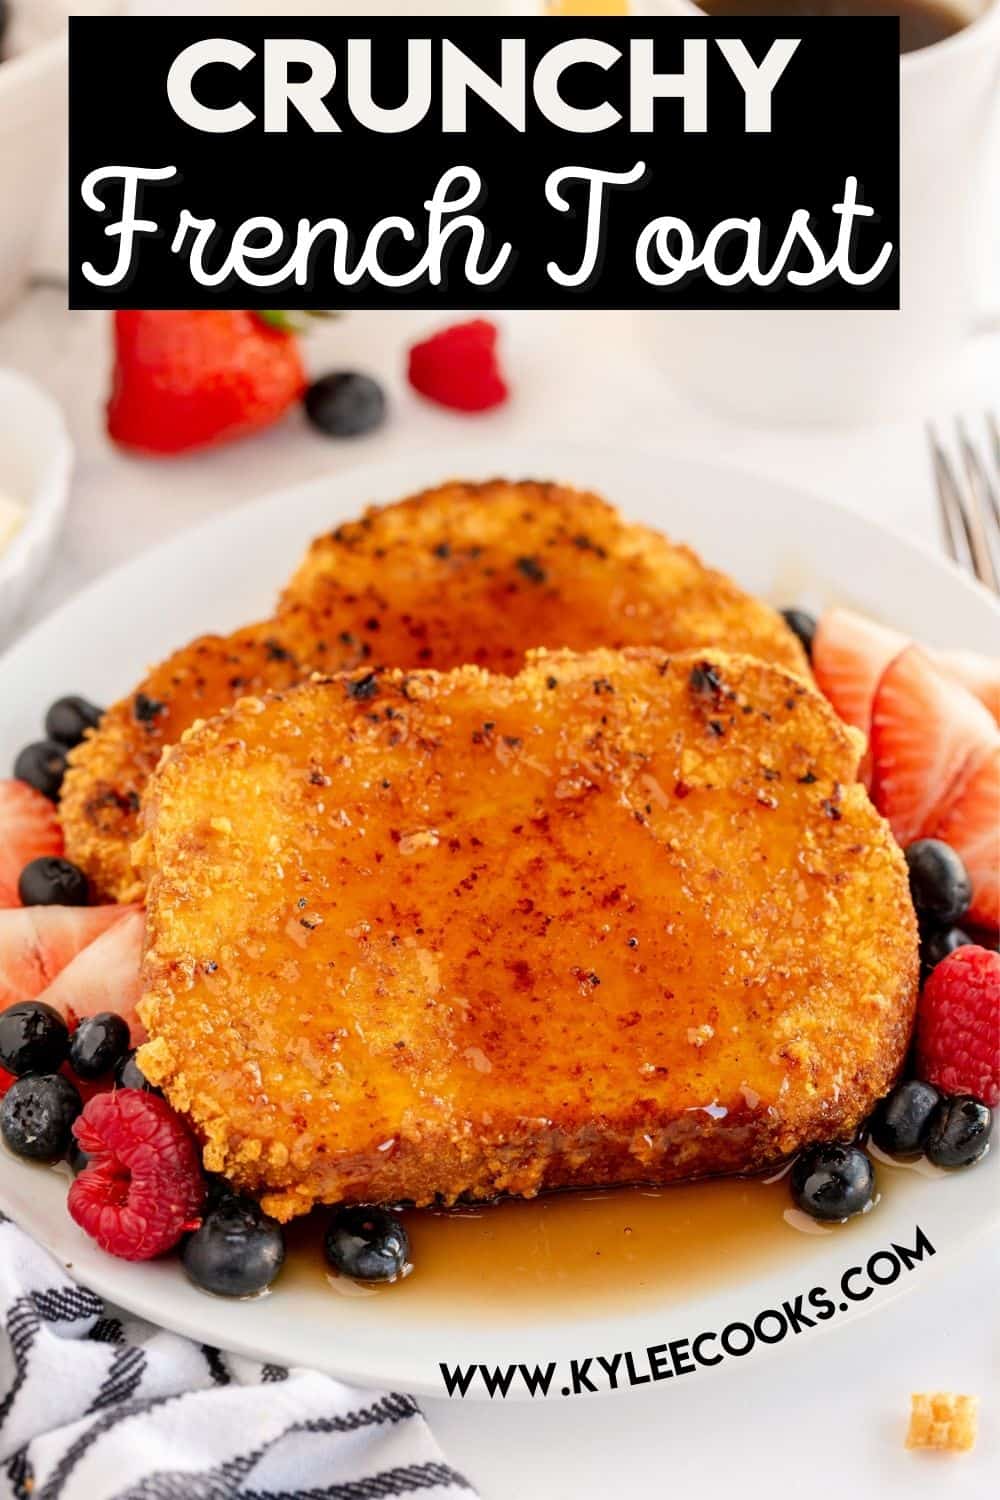 crunchy french toast with text overlay